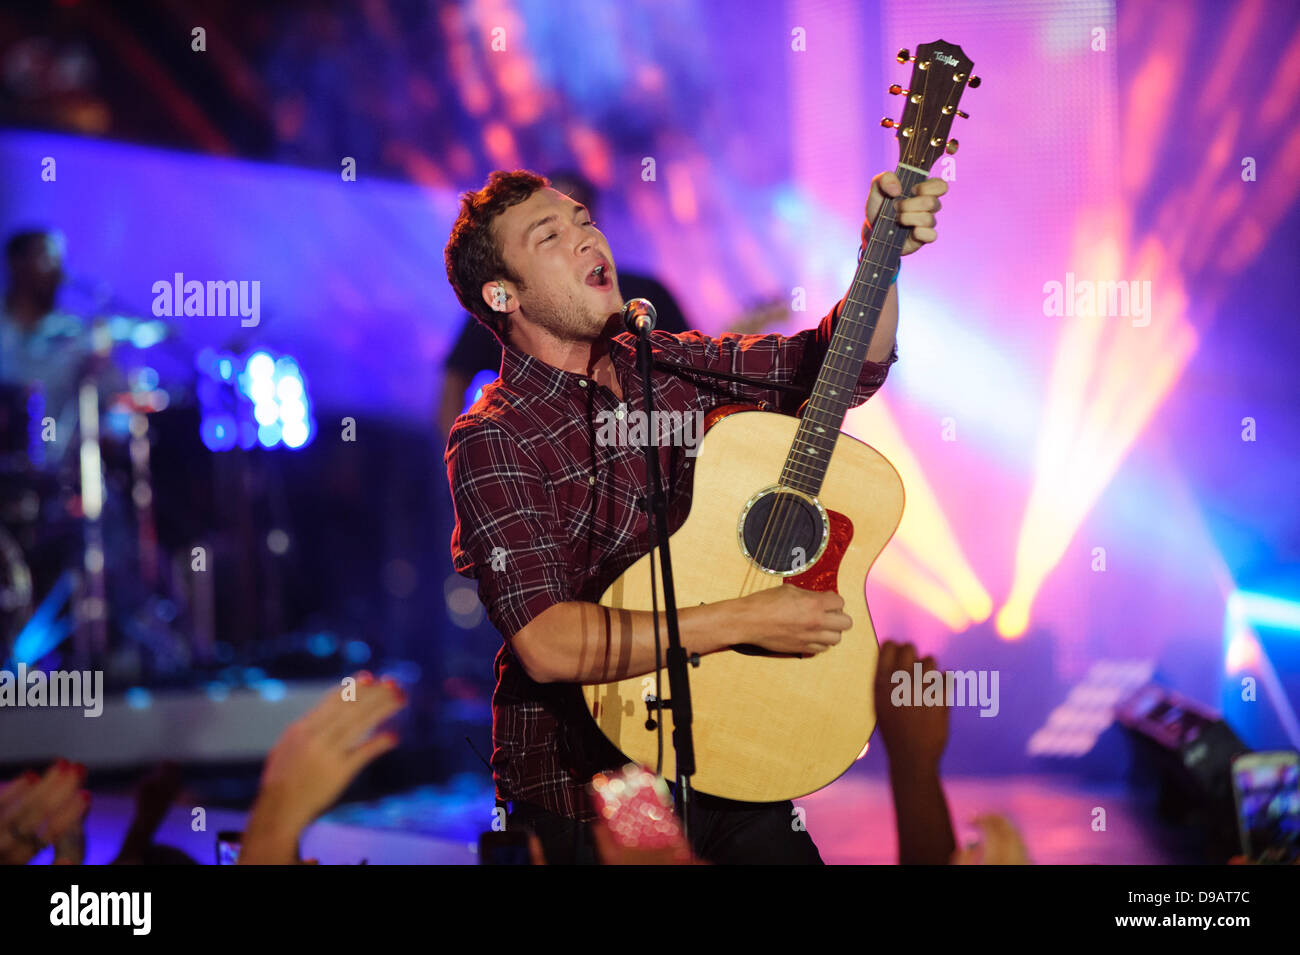 Toronto, Canada. 16th June, 2013. Phillip Phillips performs at the 2013 MMVA in Toronto Canada. The MuchMusic Video Awards took over the trendy Queen West village in Toronto for an award show featuring PSY and other super stars including Avril Lavigne, Demi Lovato, Serena Ryder, Ed Sheeran, Marianas Trench, Classified, and Armin Van Buuren with Trevor Guthrie. Credit:  Victor Biro/Alamy Live News Stock Photo